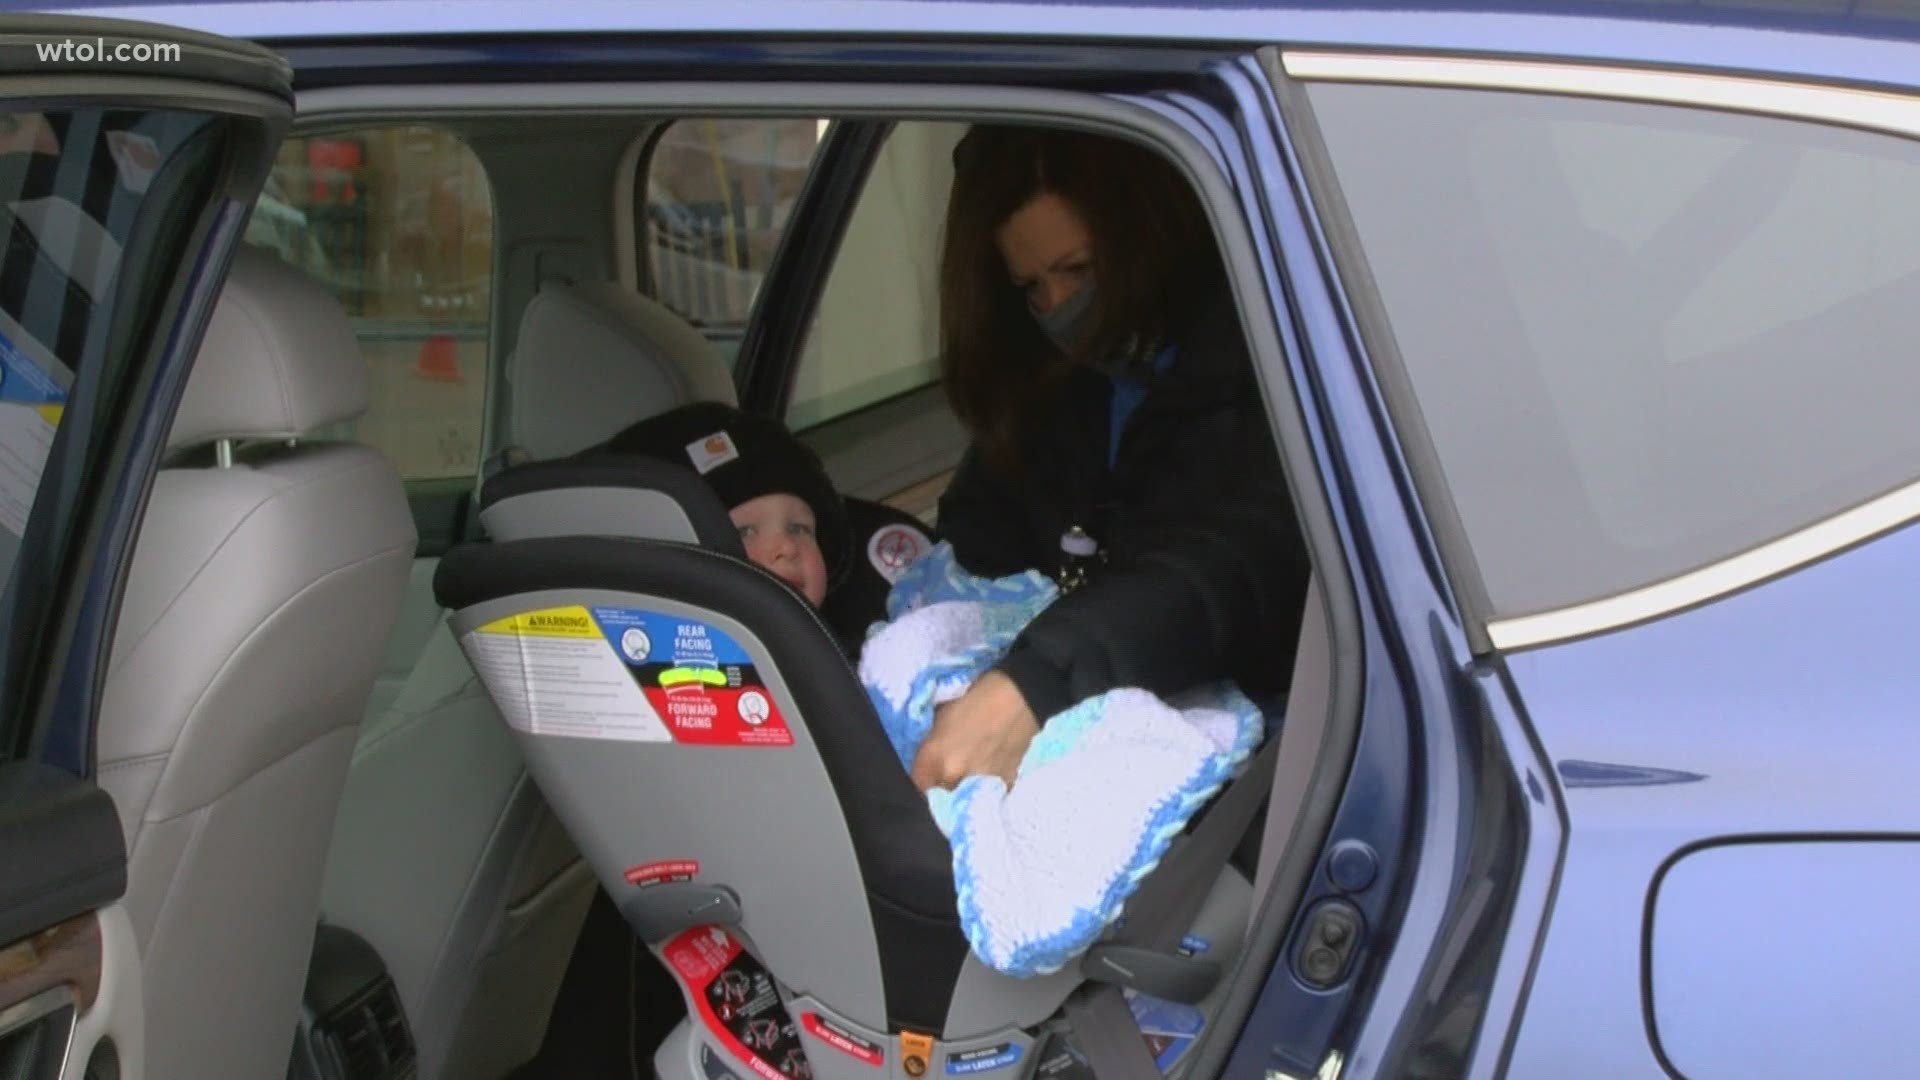 A safety expert says thick, fluffy coats could interfere with car seat harnesses.